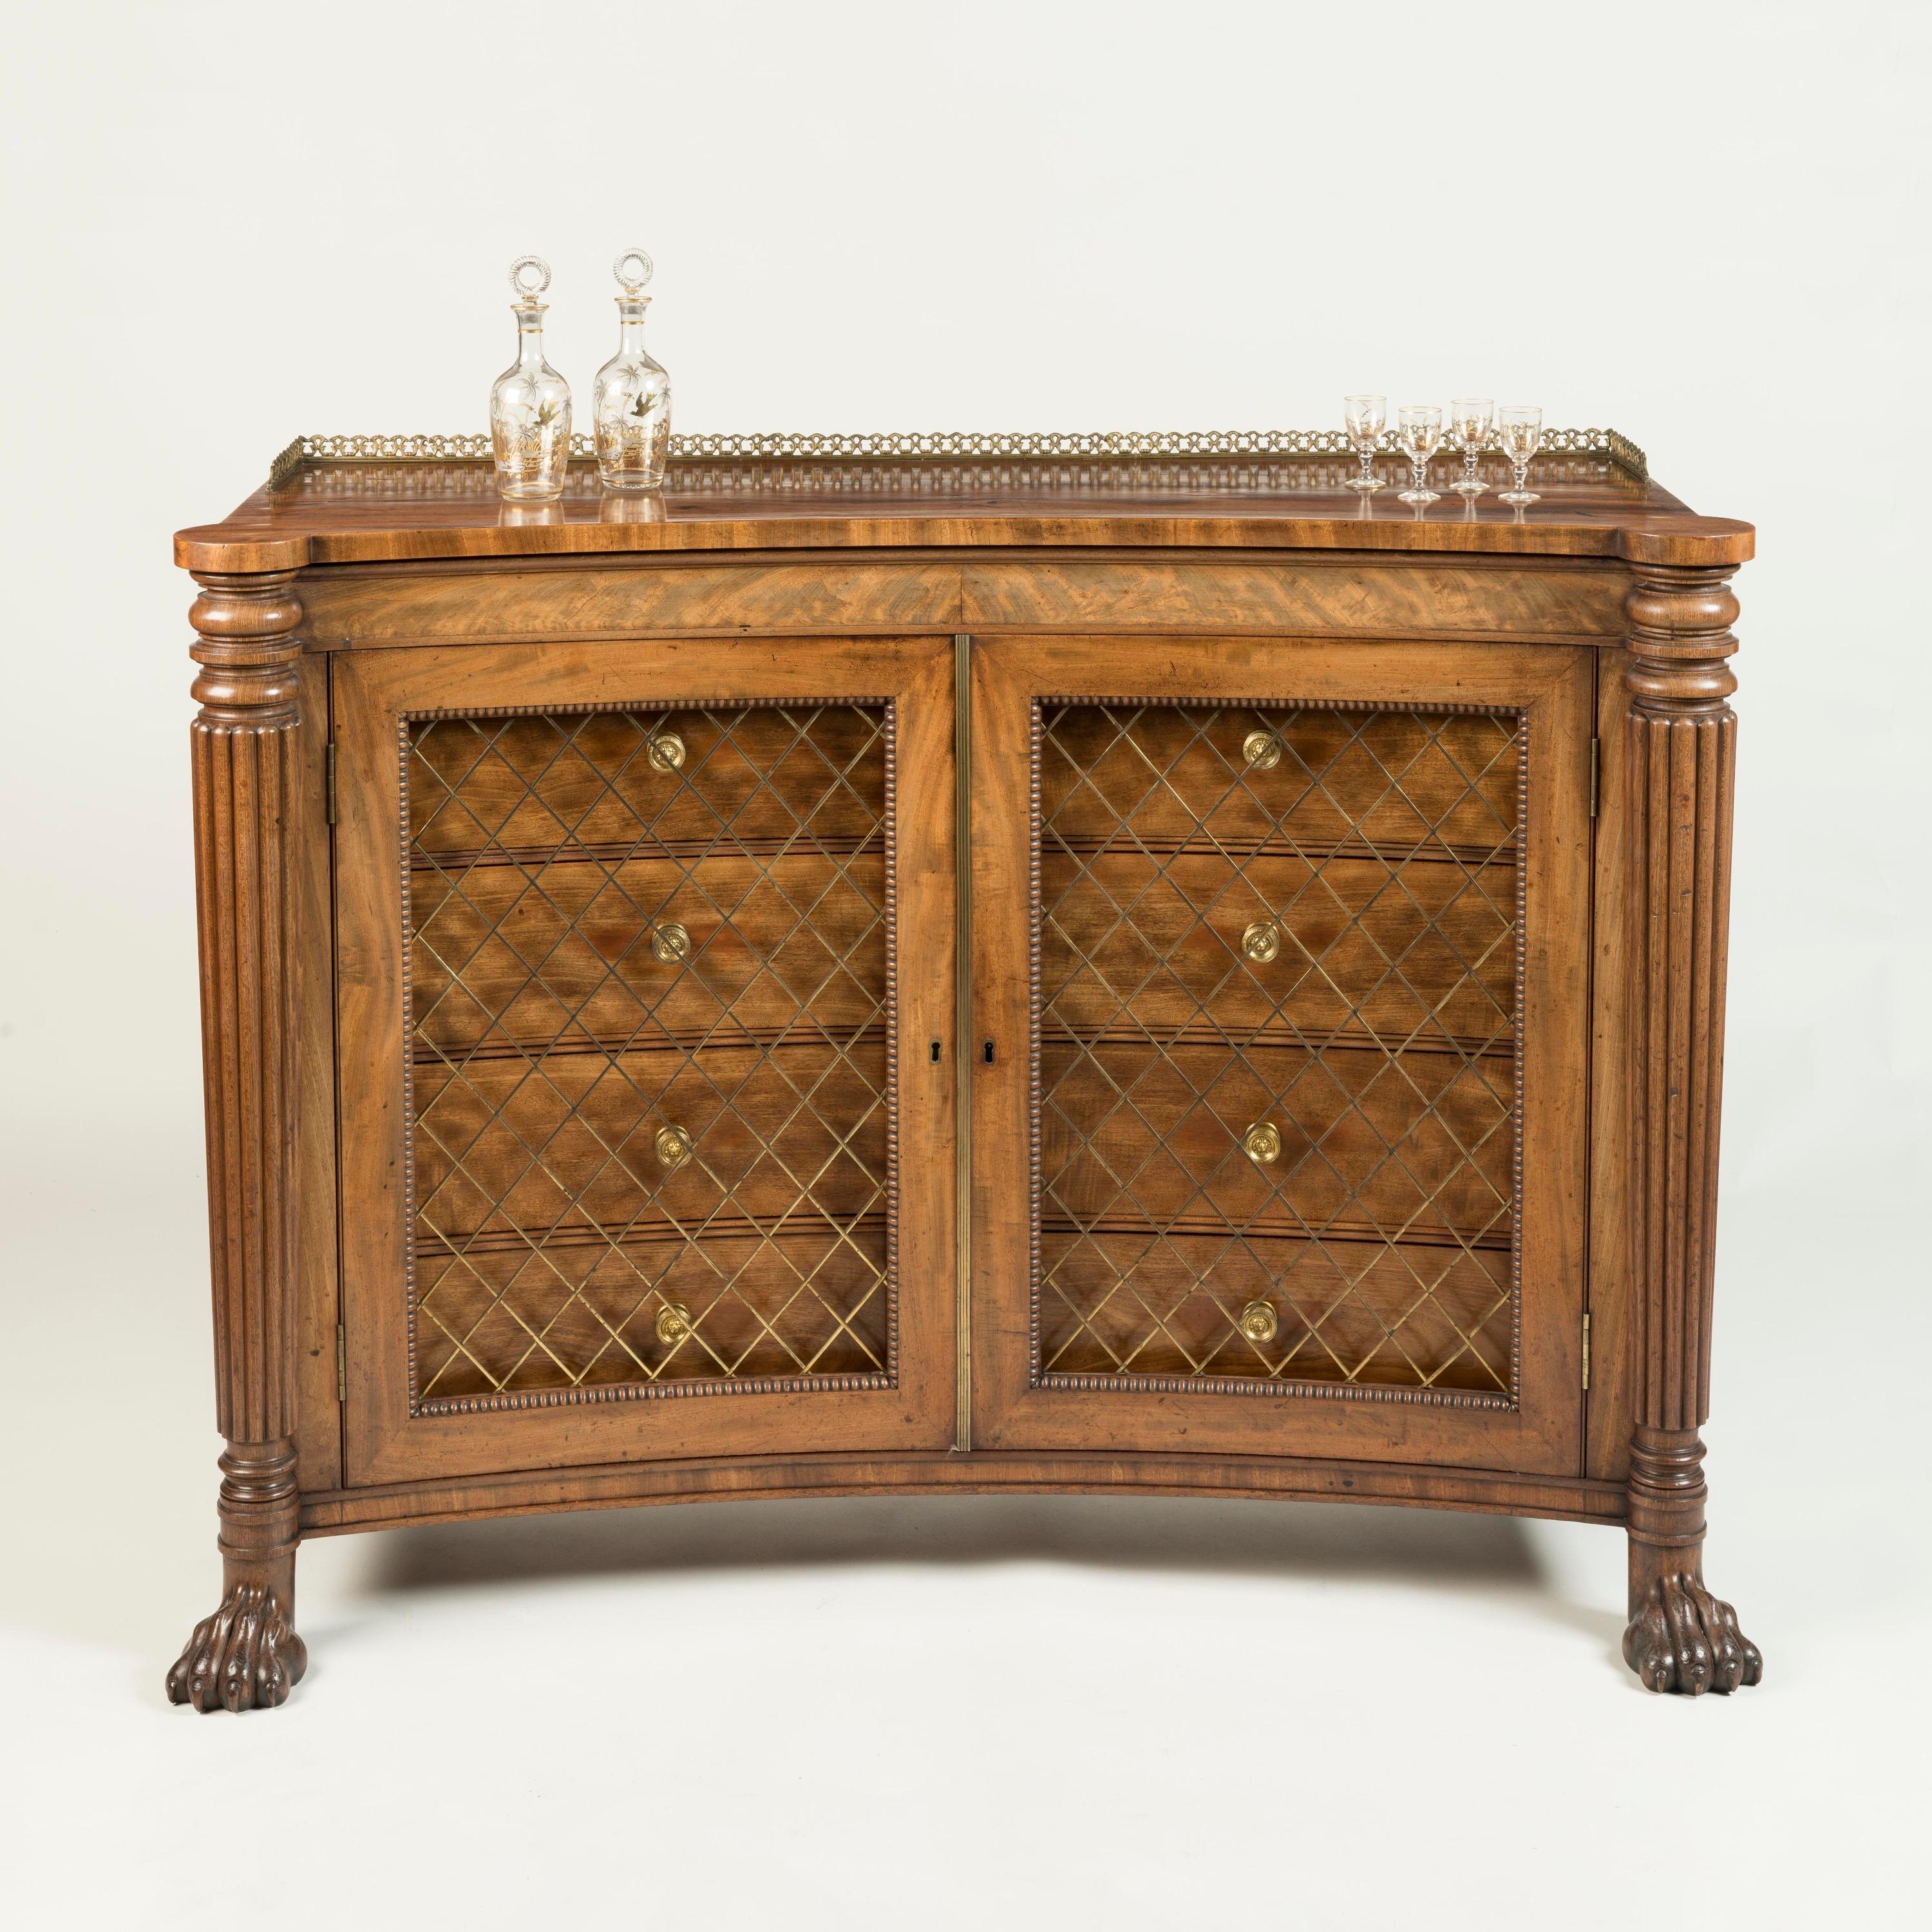 A Rare Regency Concave Side Cabinet
Firmly attributed to Gillows

Constructed from a flamed Cuban mahogany, supported on boldly carved lion's paw feet, the side cabinet of unusual shape with an incurved front, flanked by tapering and reeded columns,